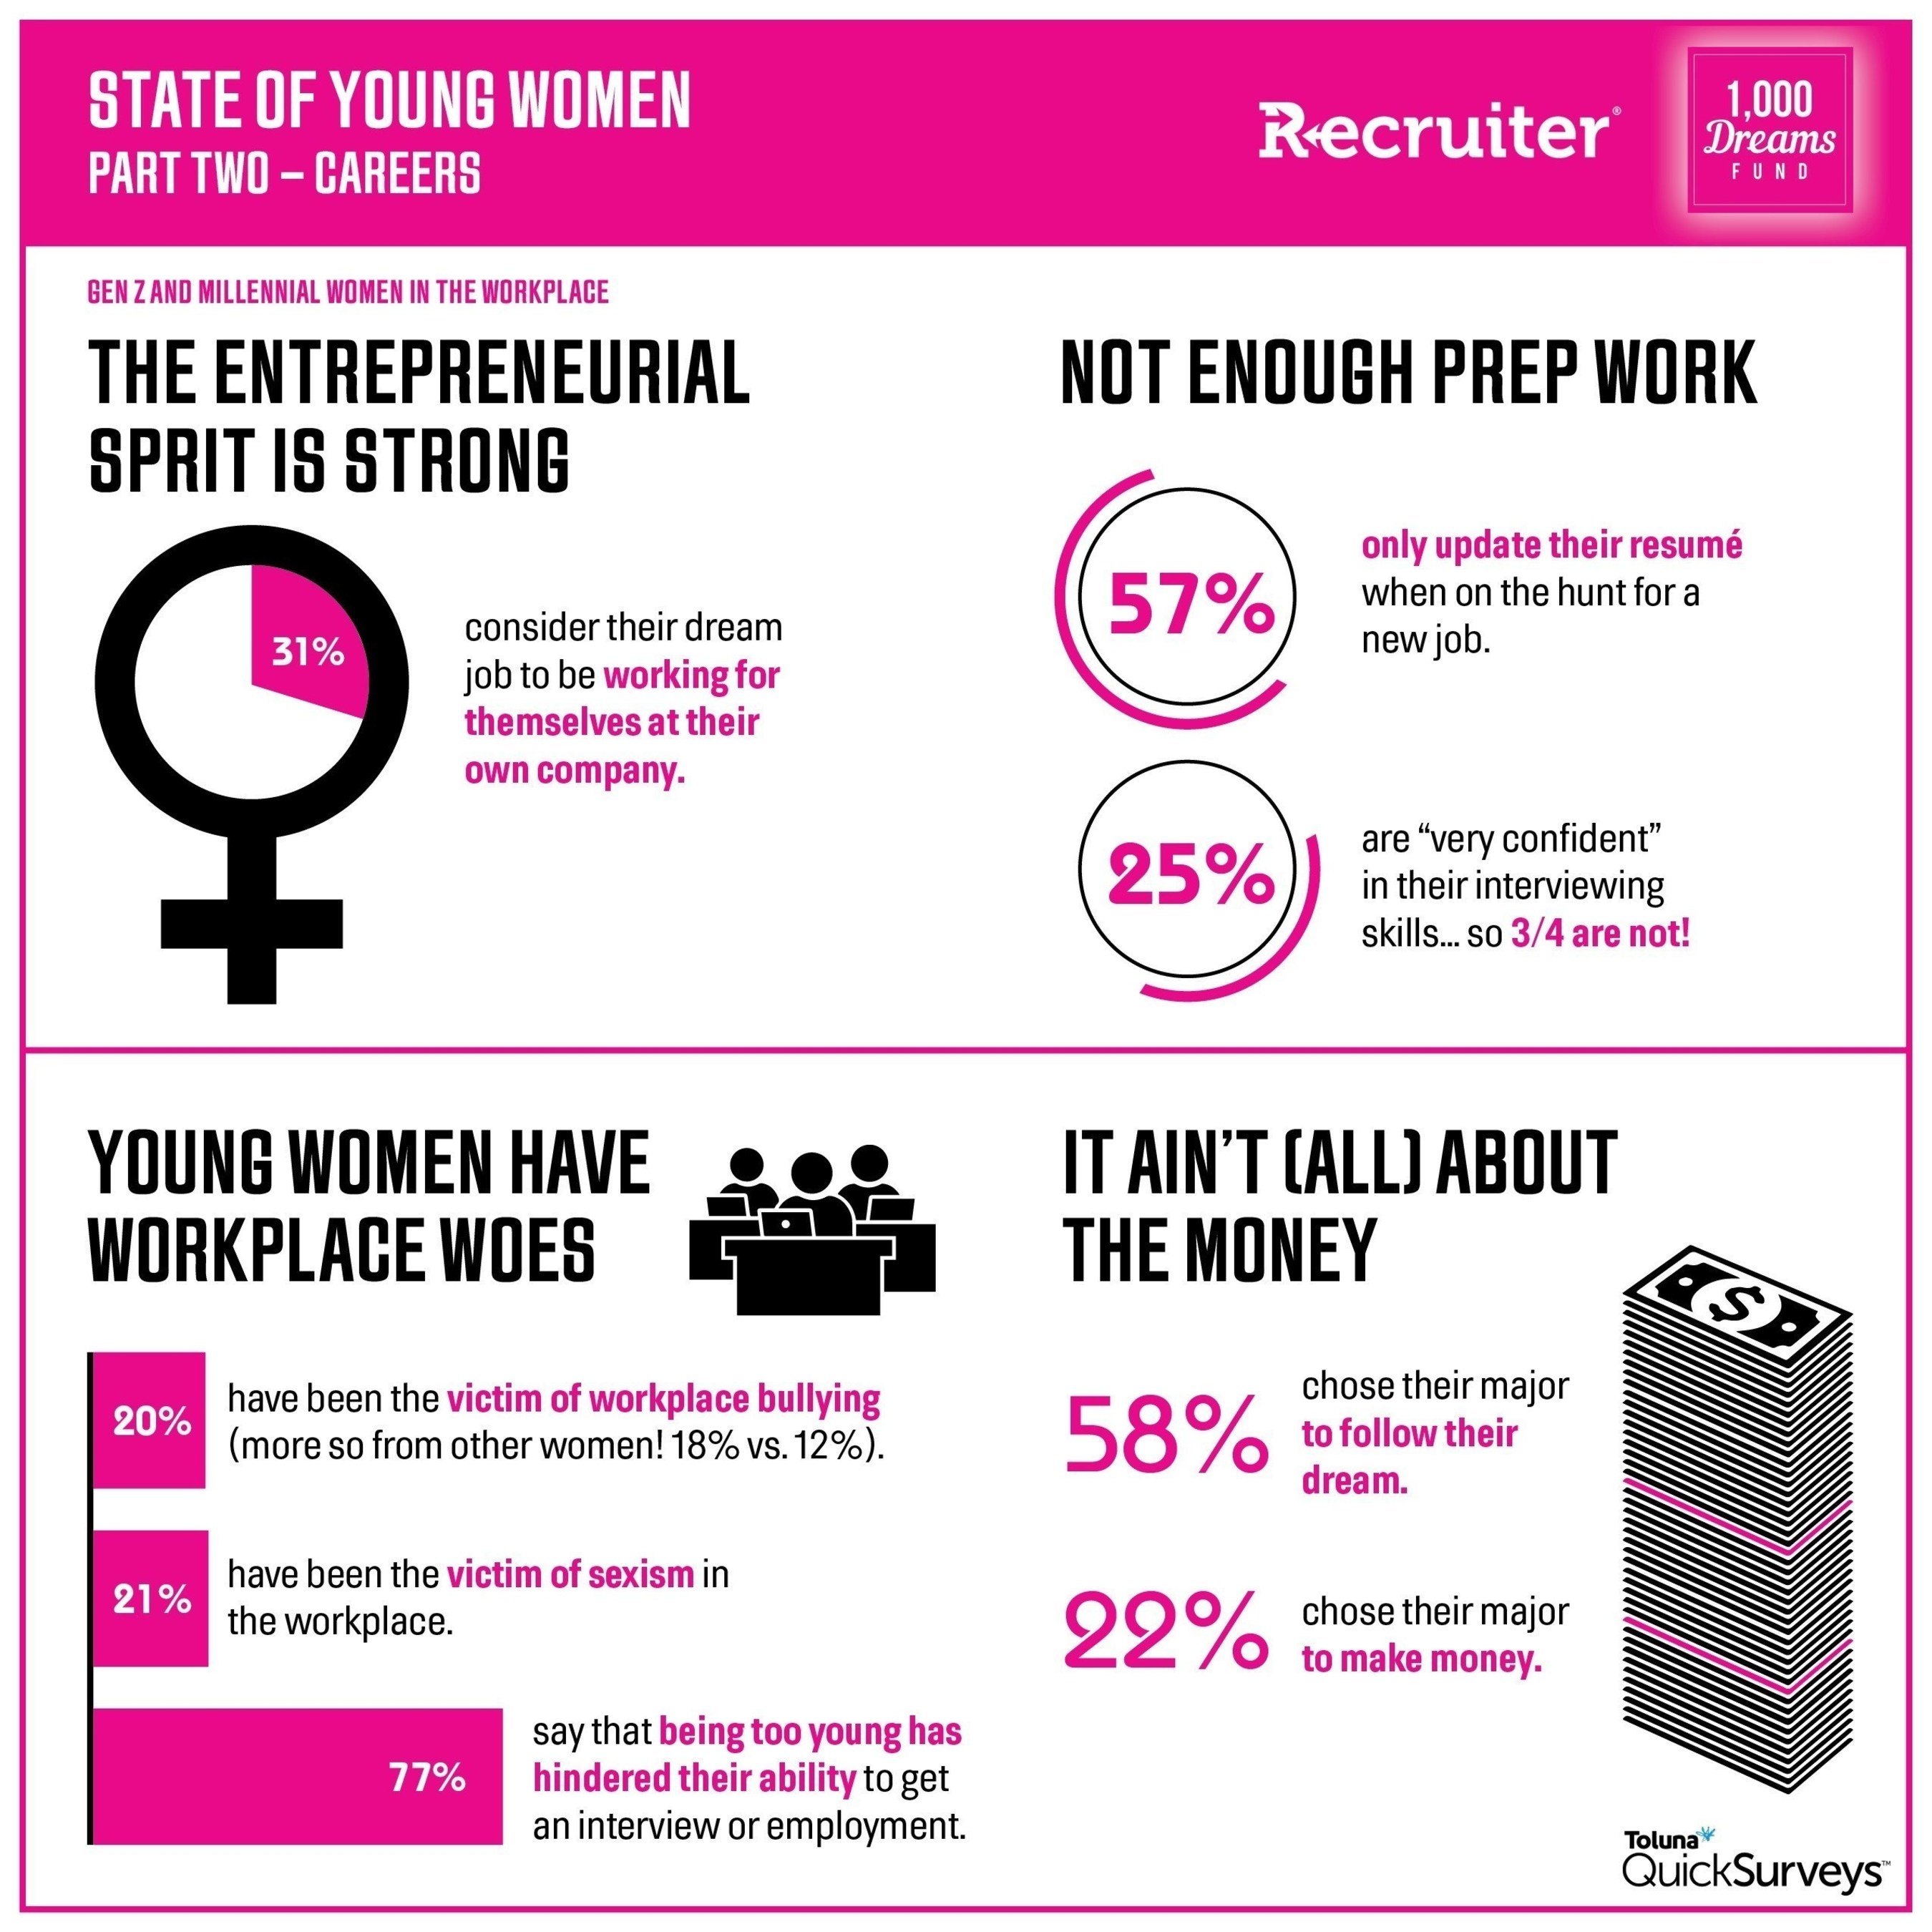 1,000 Dreams Fund and Recruiter.com Examine the State of Young Women in the Workplace. A National Survey conducted by Toluna Quicksurveys.